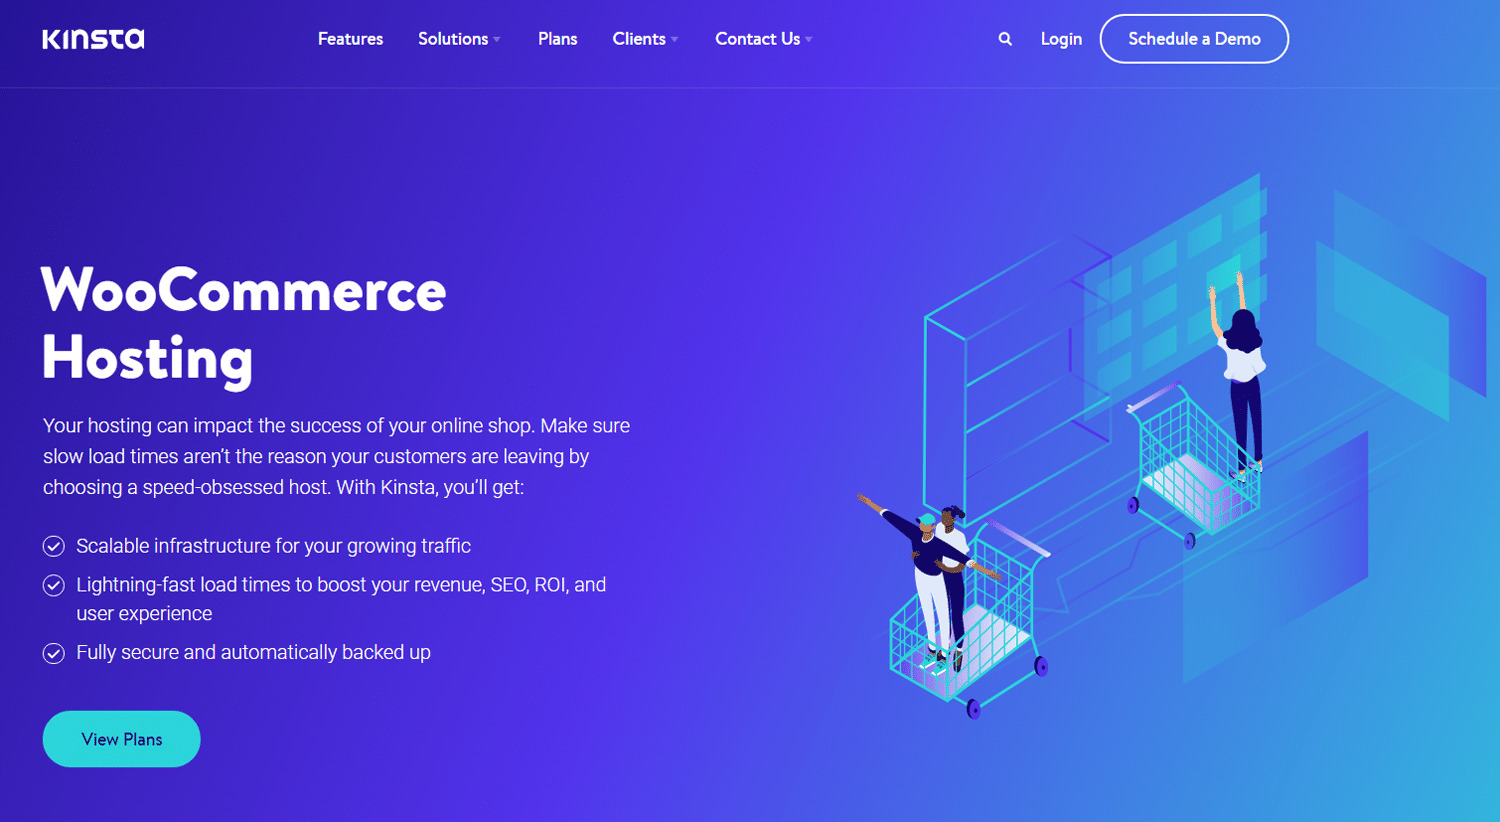 Kinsta's WooCommerce hosting page with an illustration of people and shopping carts against a blue background.